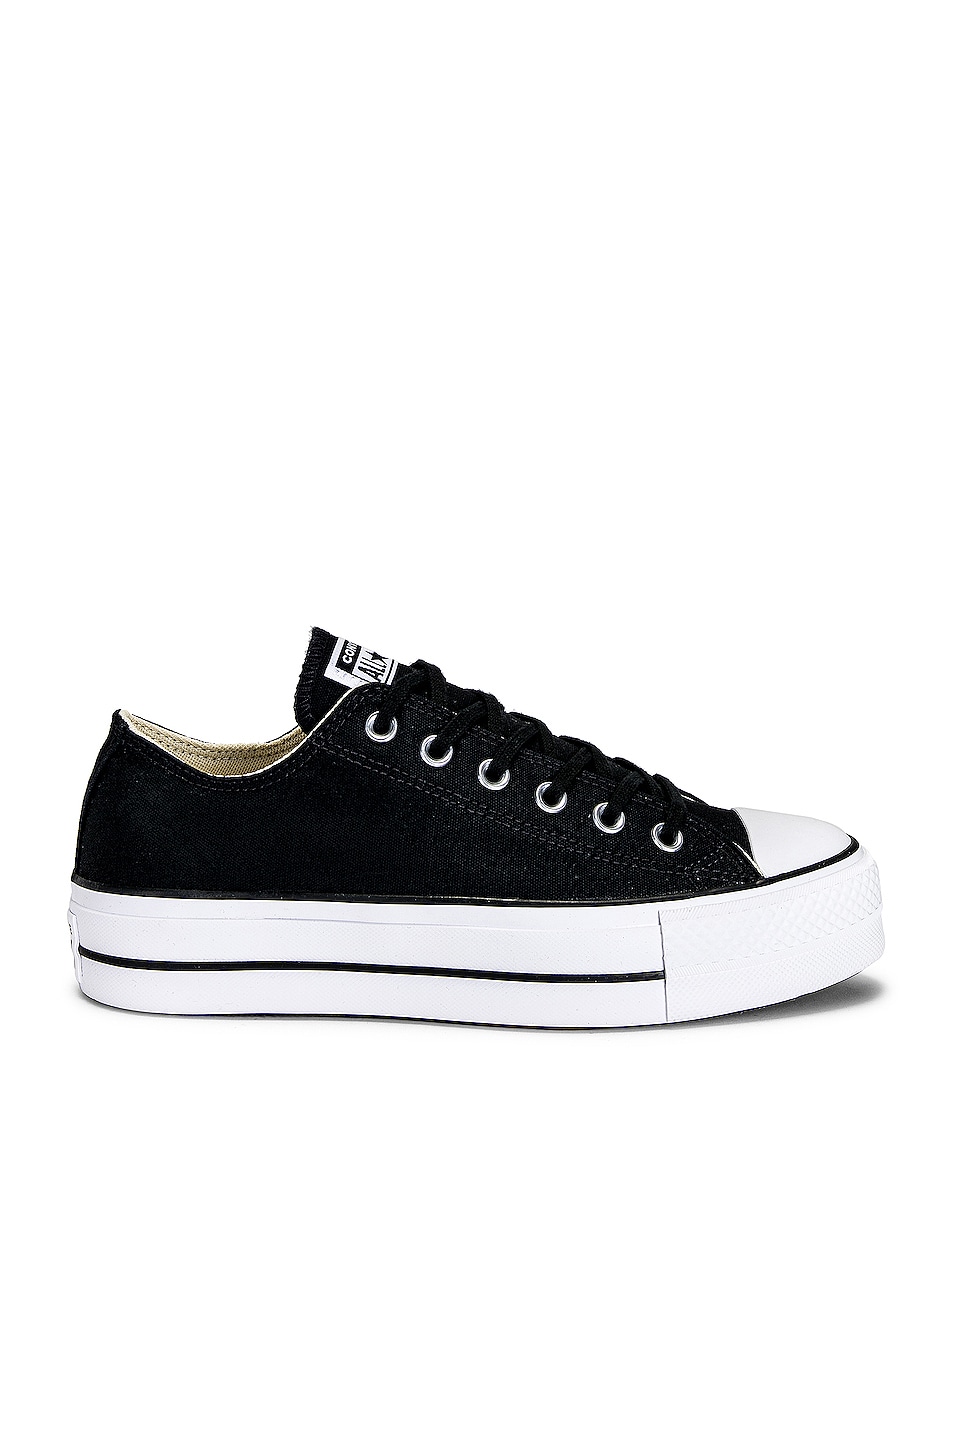 Converse Chuck Taylor All Star Platform Canvas Low Tops in Black ...